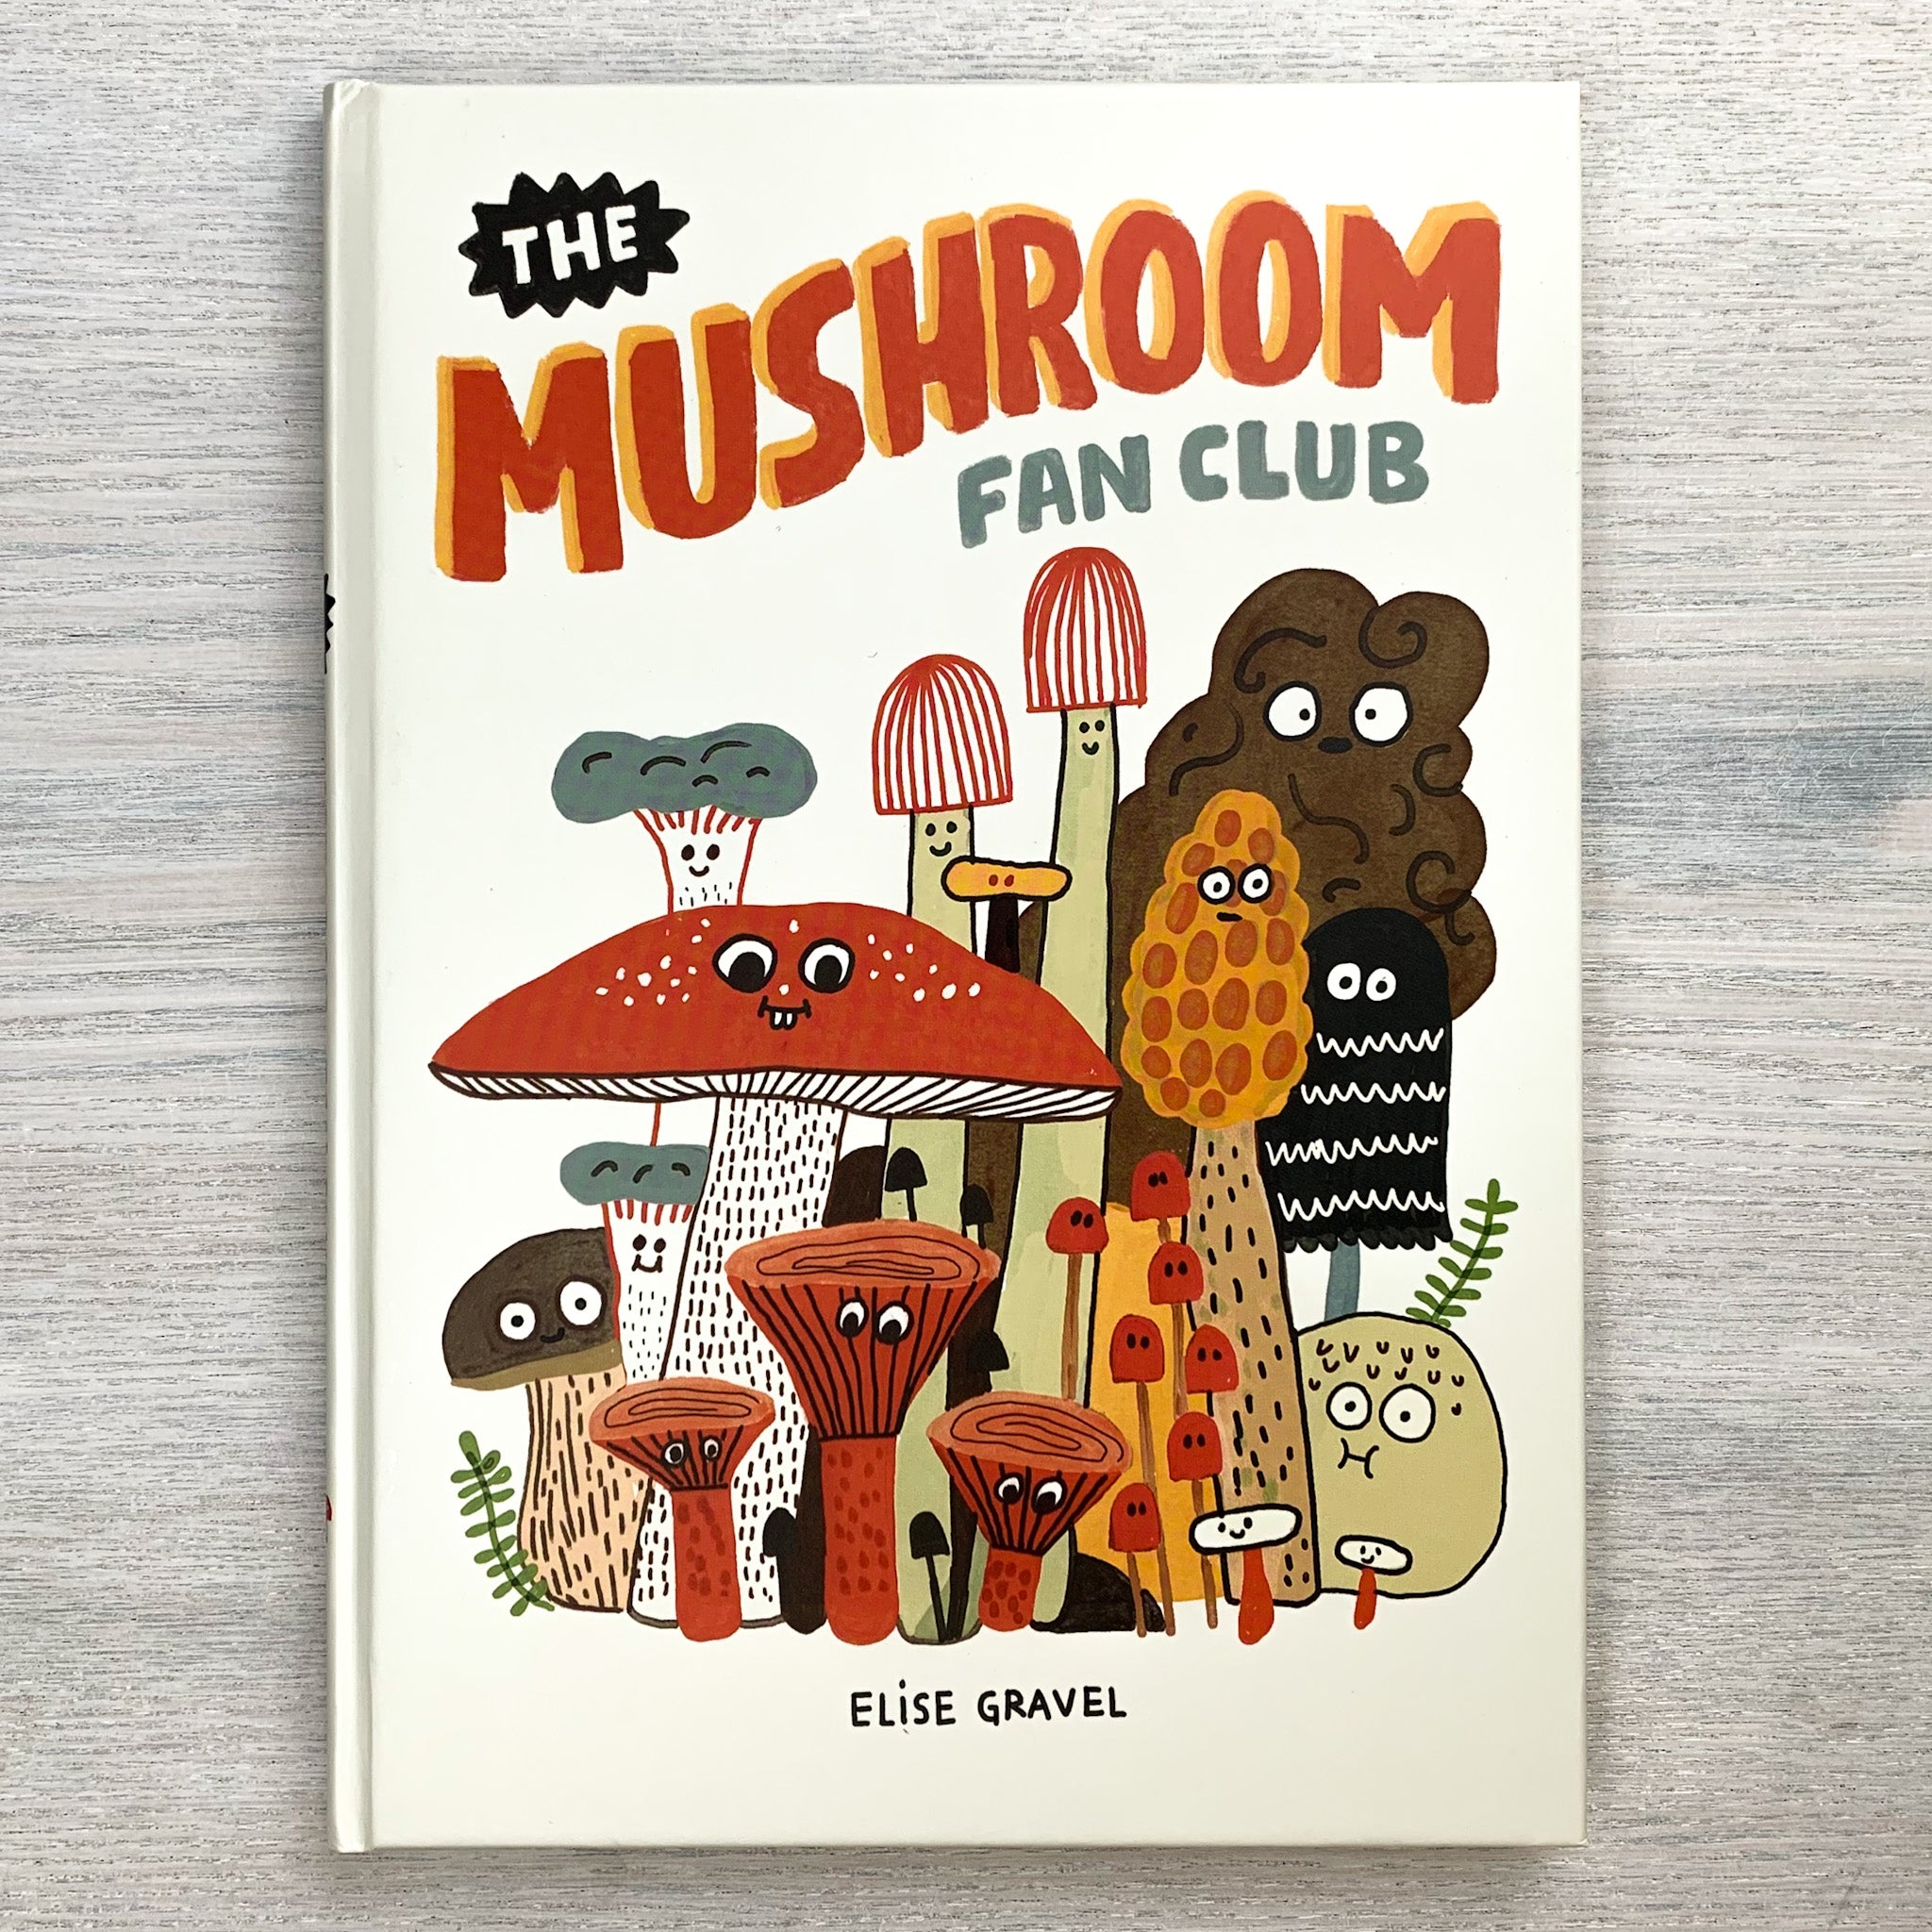 Mushrooms Coloring Book: Adult Coloring Book Featuring Mushrooms, Snails,  and